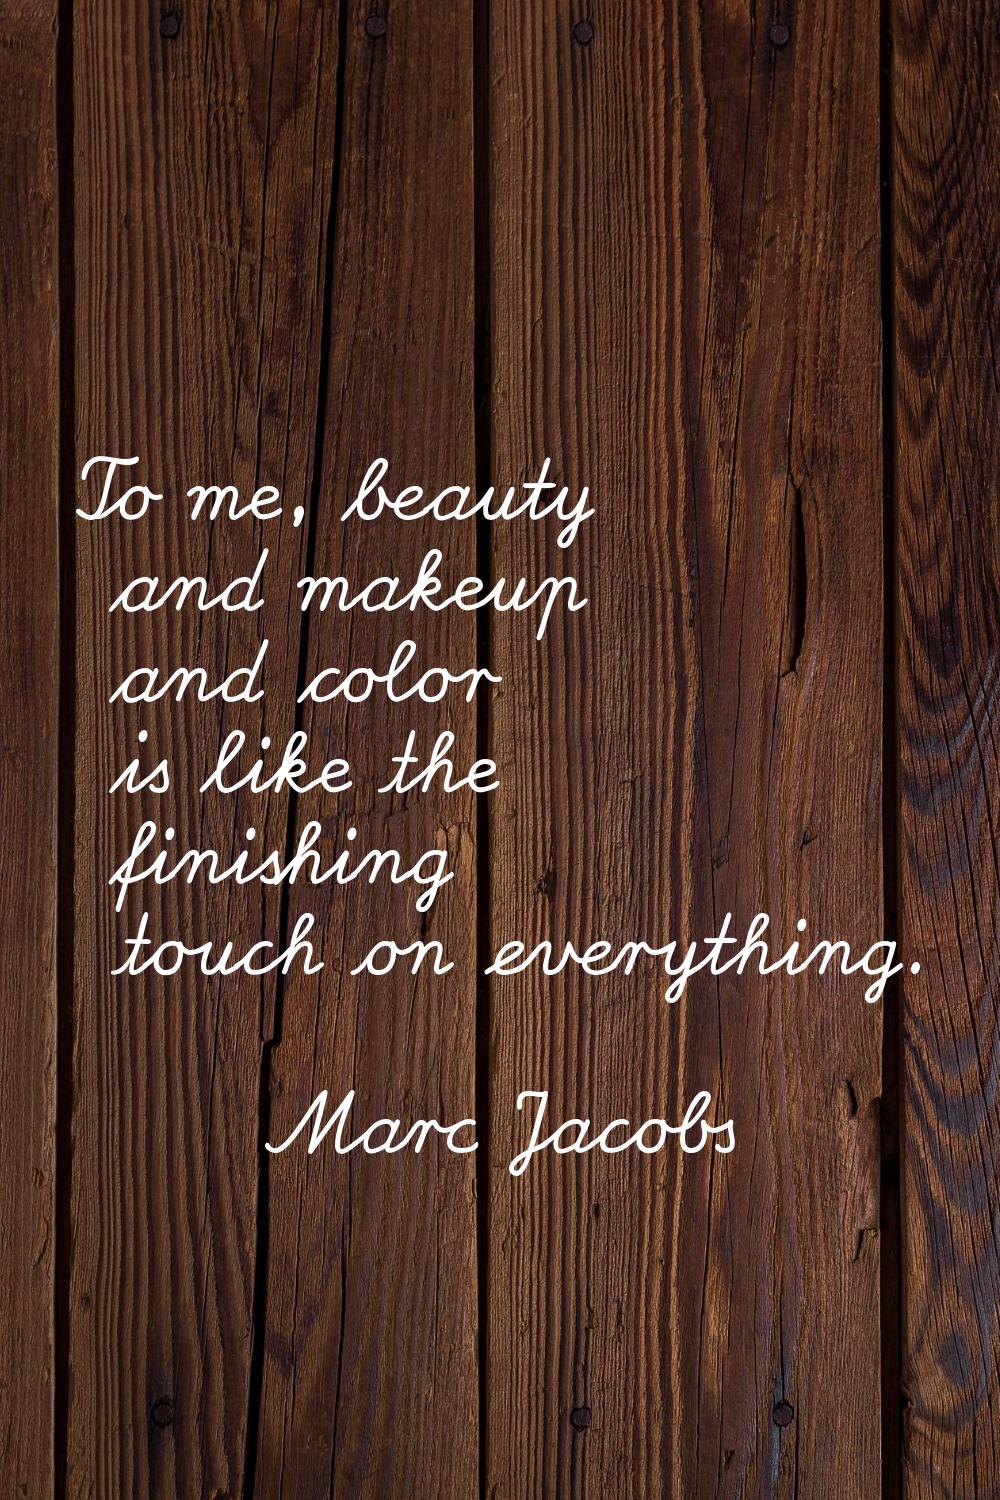 To me, beauty and makeup and color is like the finishing touch on everything.